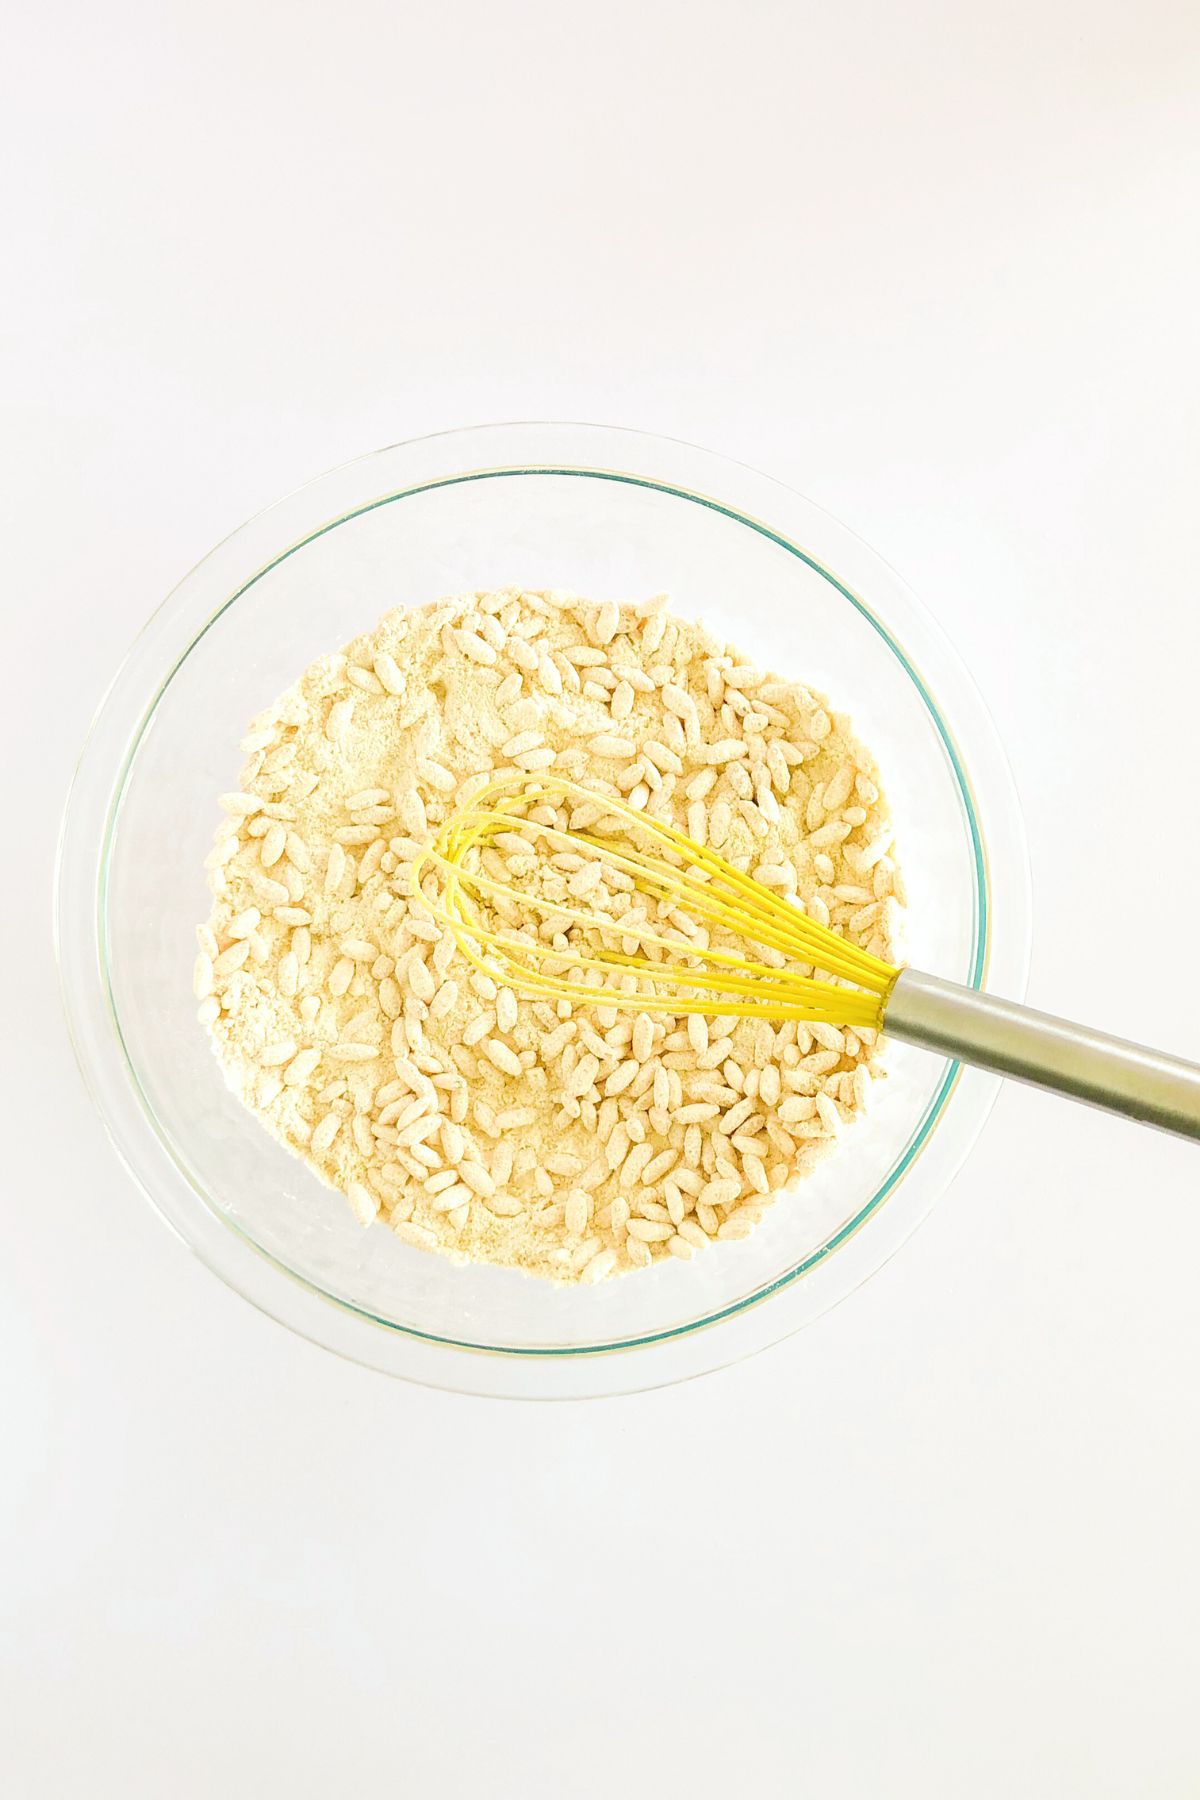 puffed rice cereal in a glass bowl